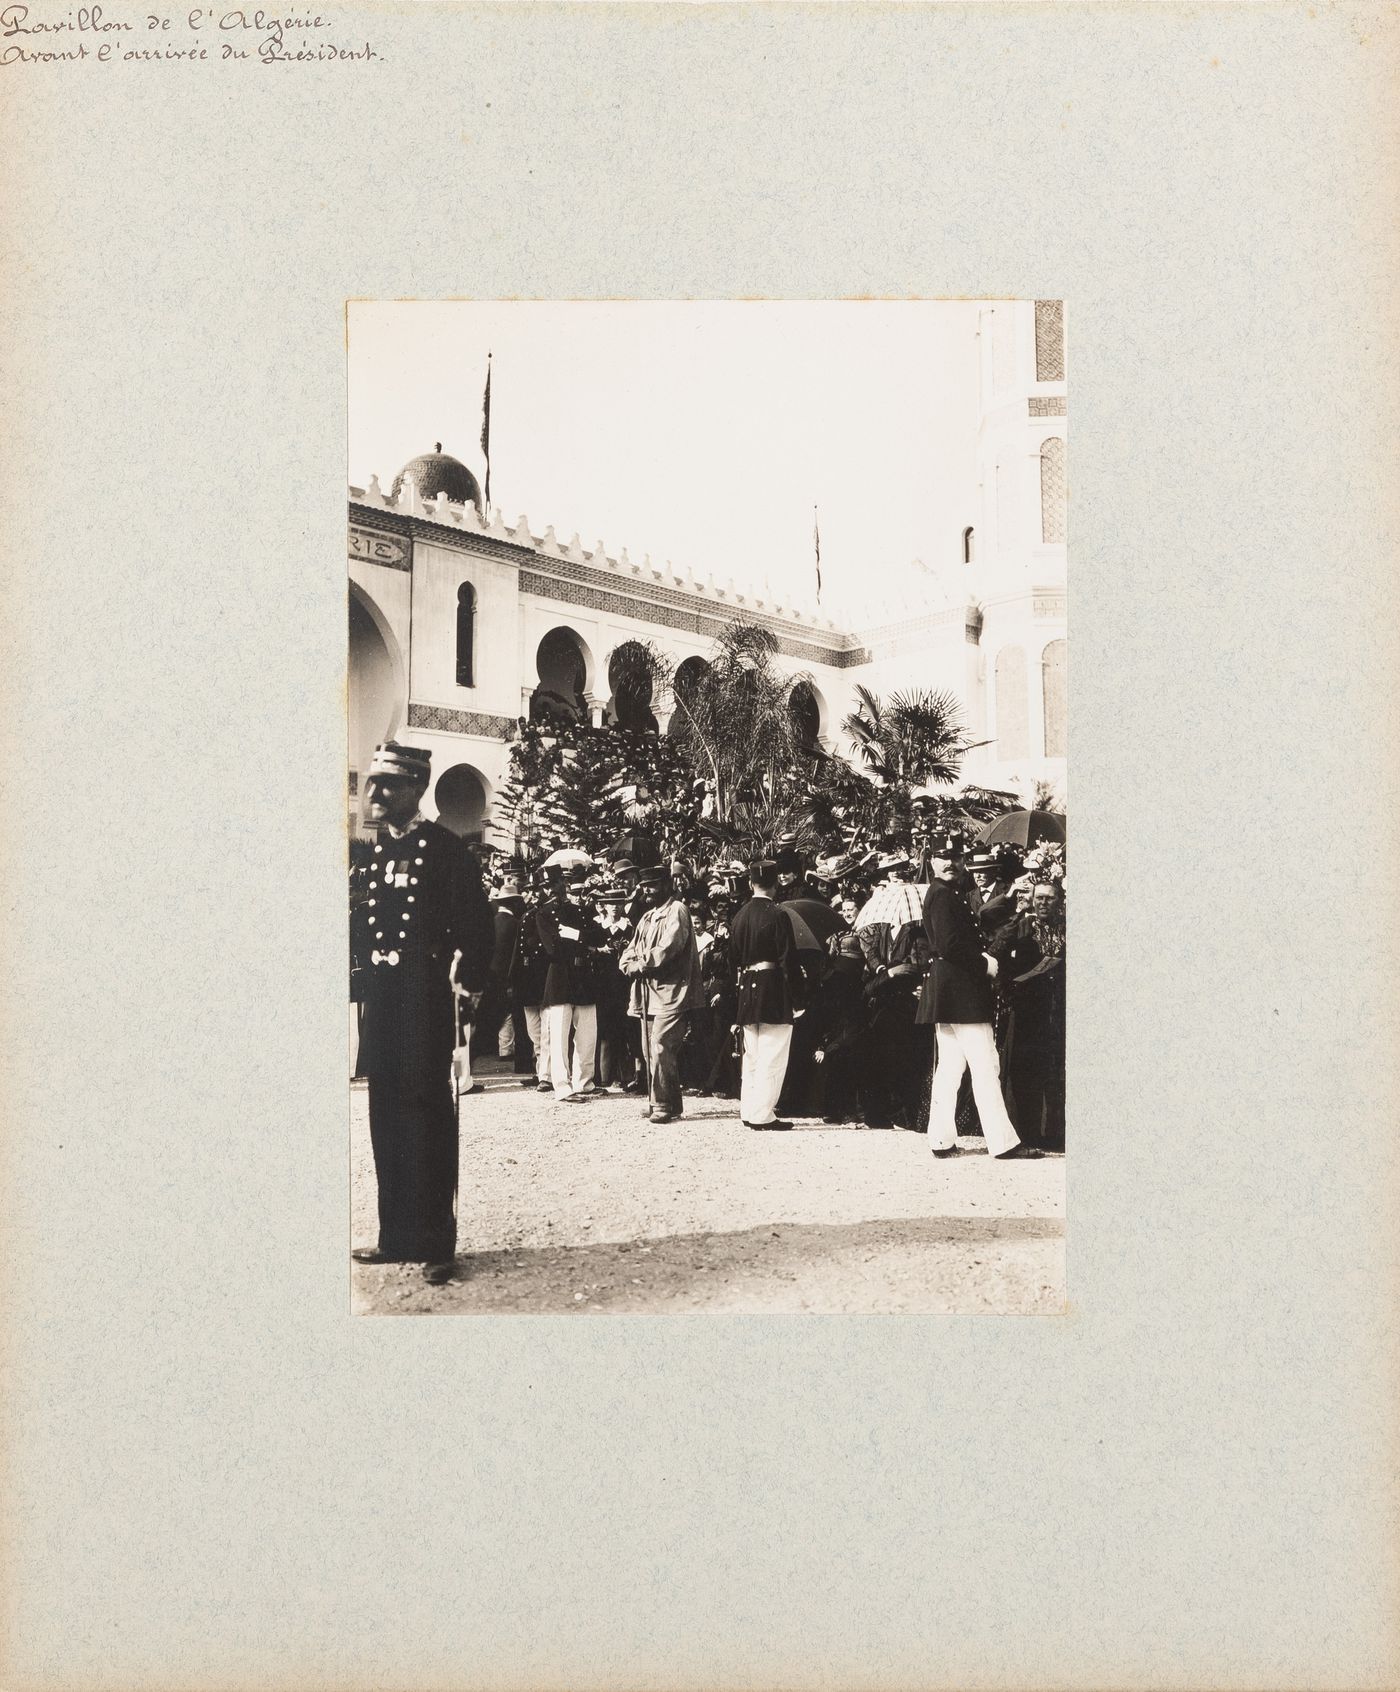 View of crowd being controlled by policemen at Pavillon de l'Algérie during French President Émile Loubet's visit to the Exposition Universelle on opening day, 14 April 1900, Paris, France